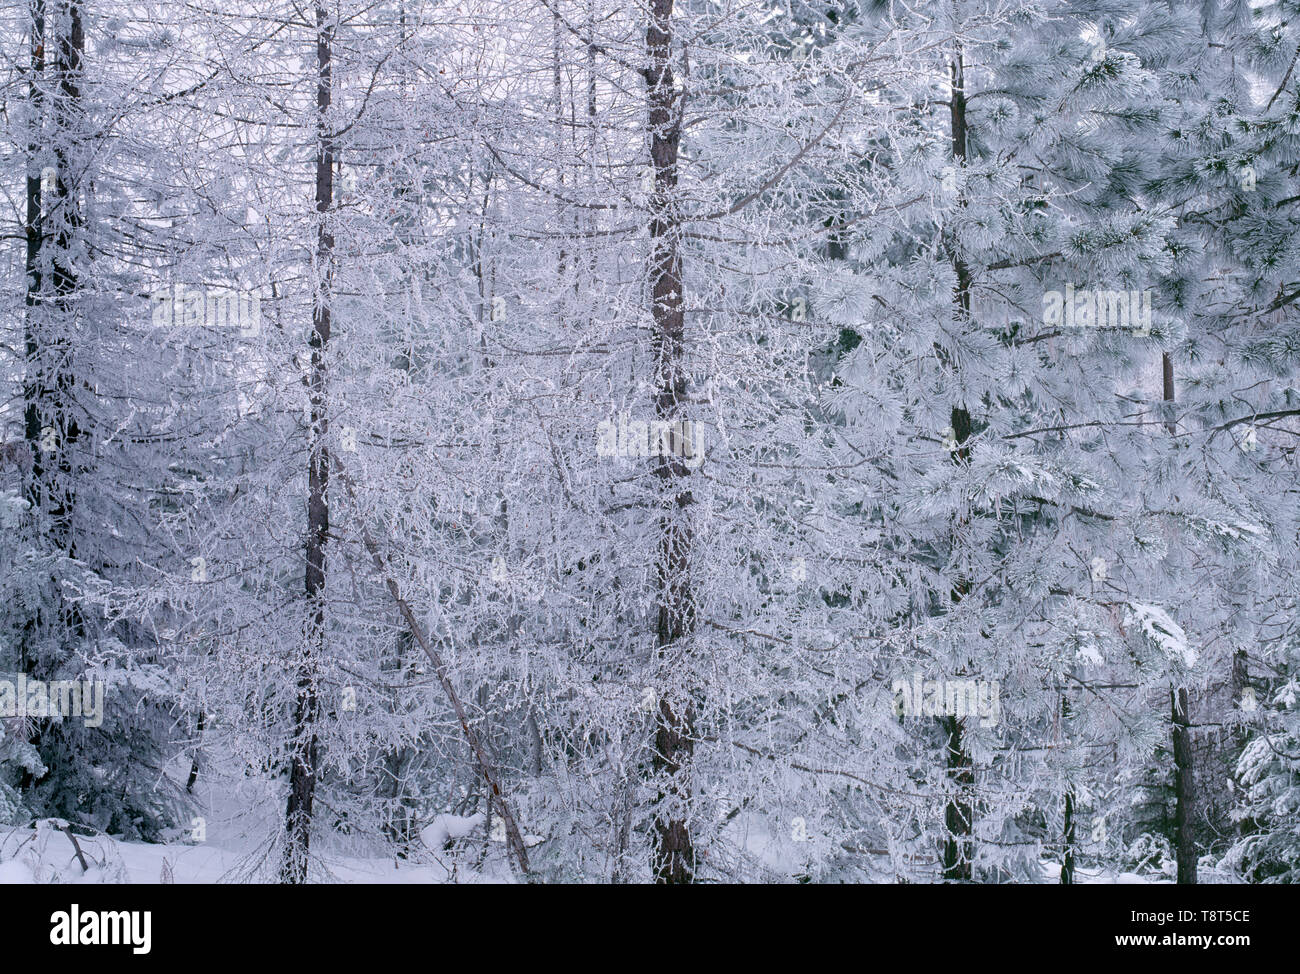 USA, Washington, Wenatchee National Forest, Frost clings to larch and pine trees near Swuak Pass. Stock Photo